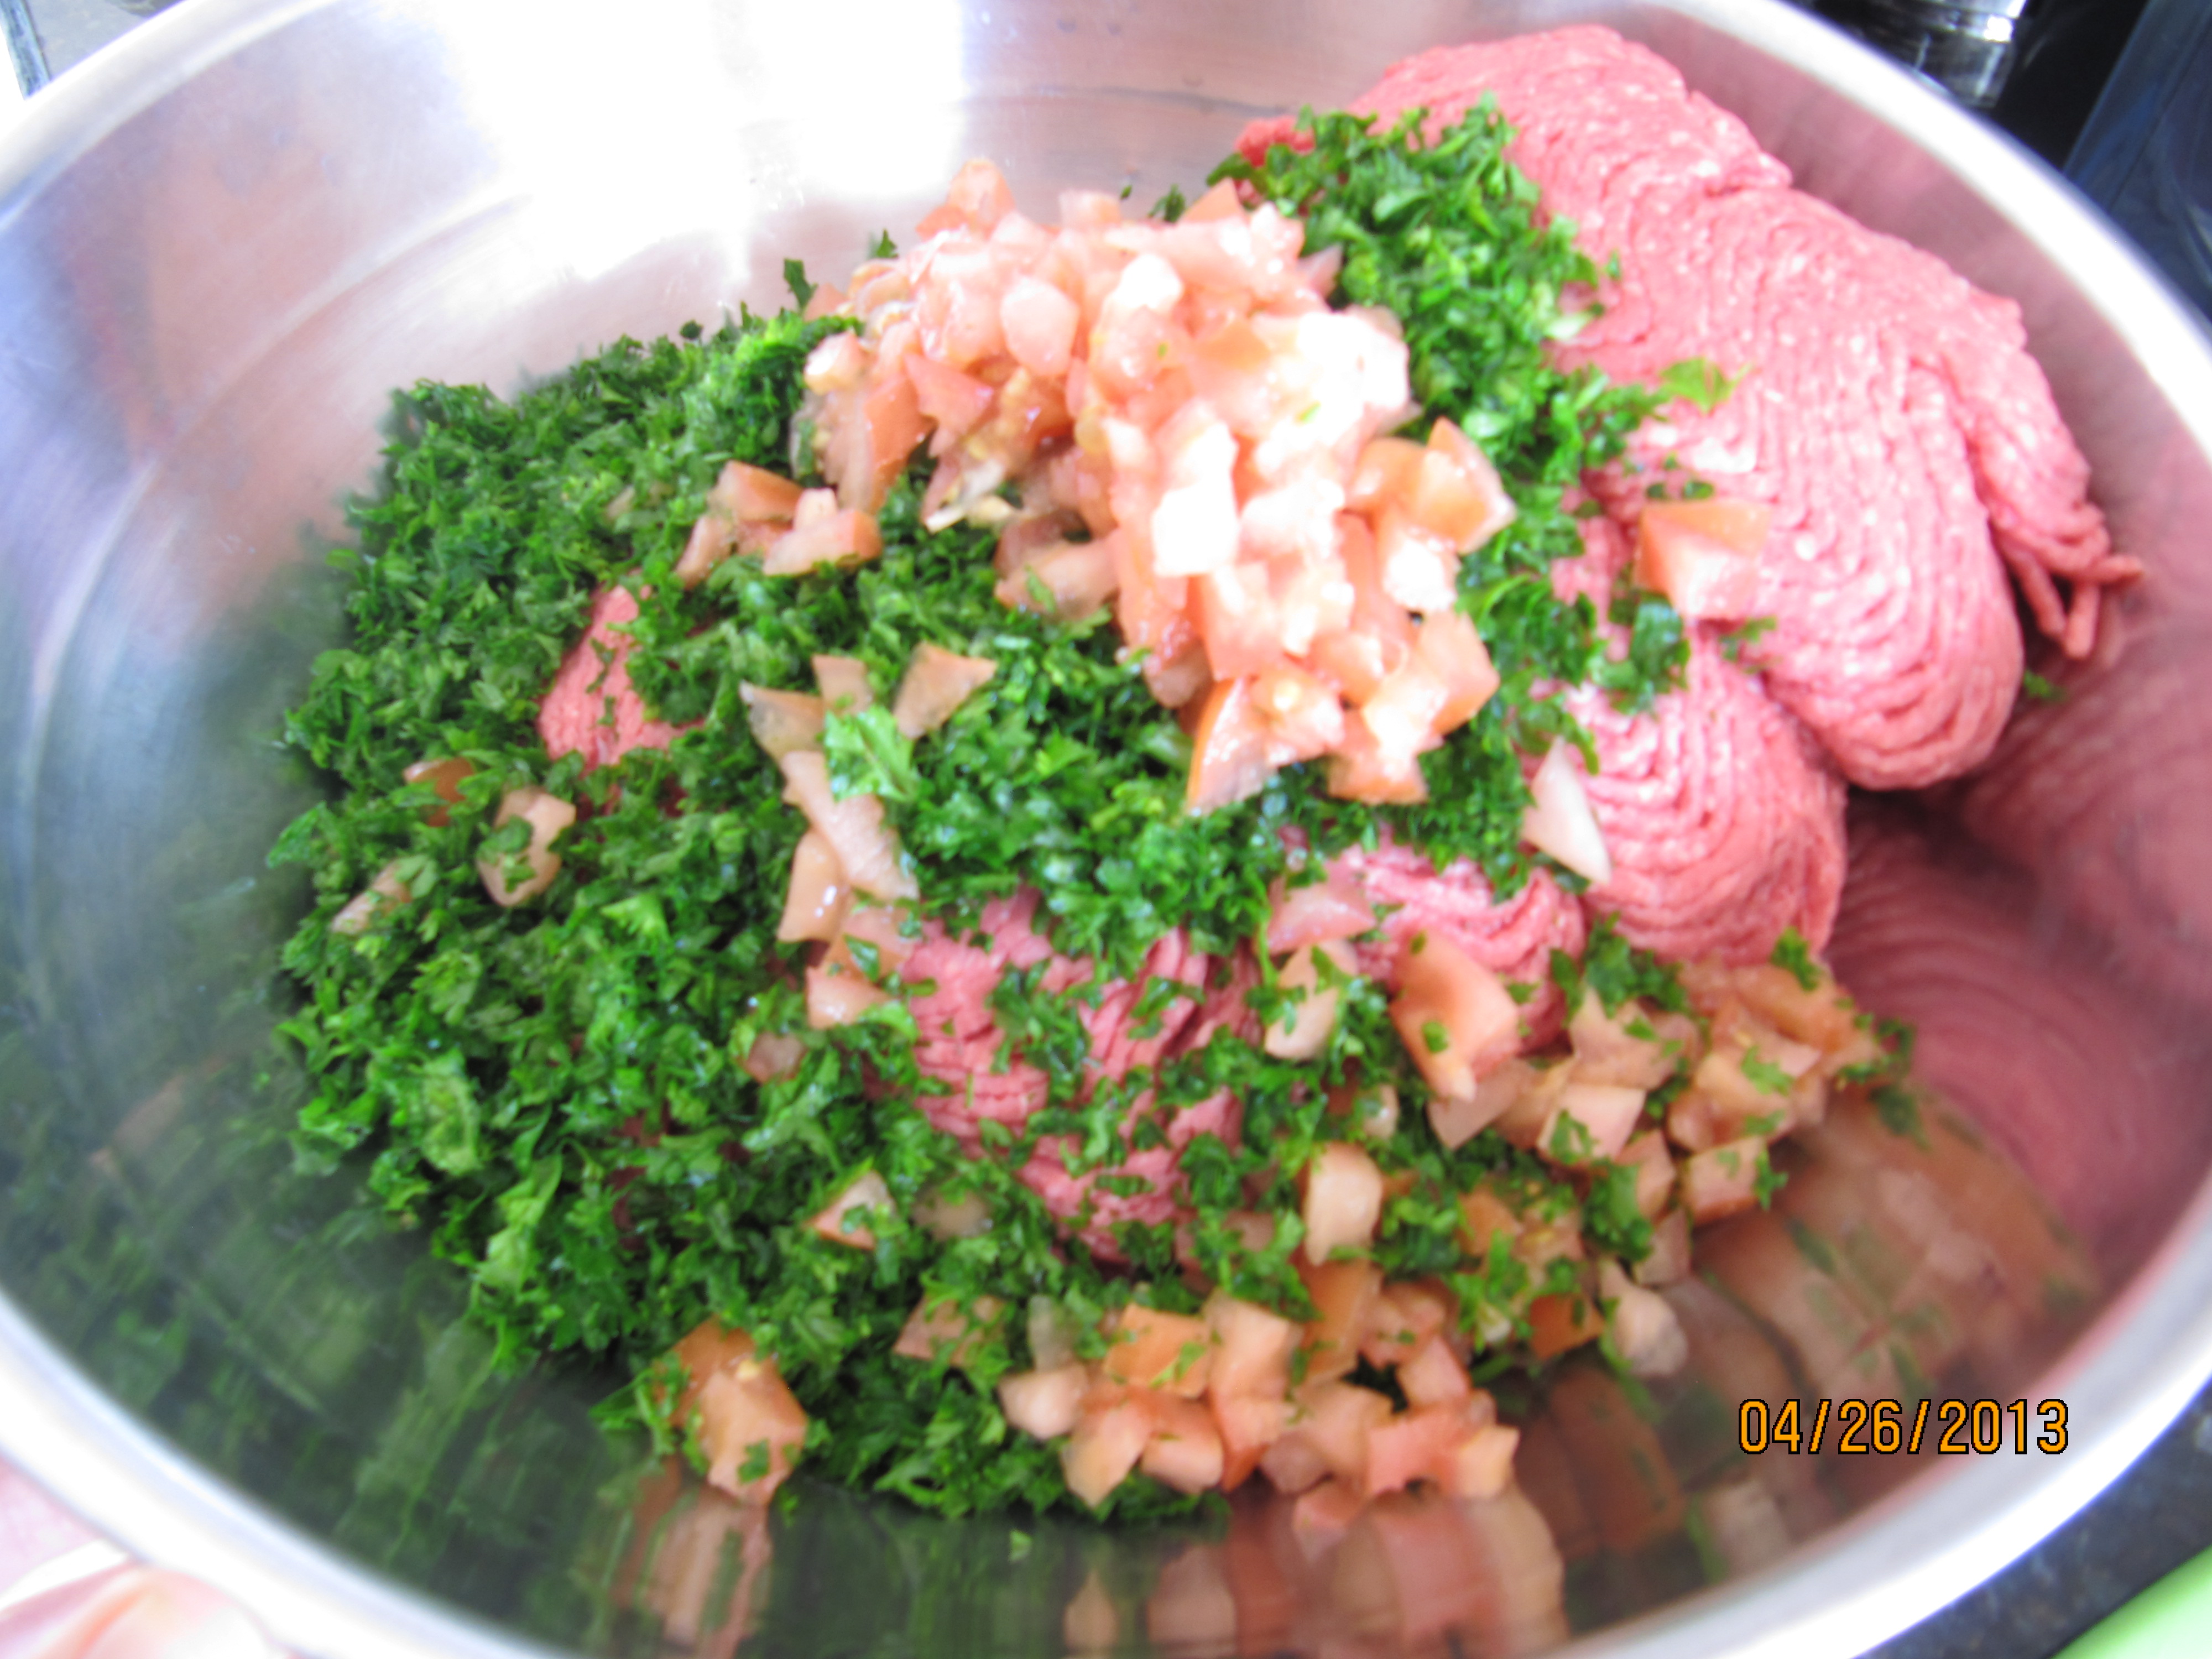 Chopped tomatoes, parsley, and ground meat